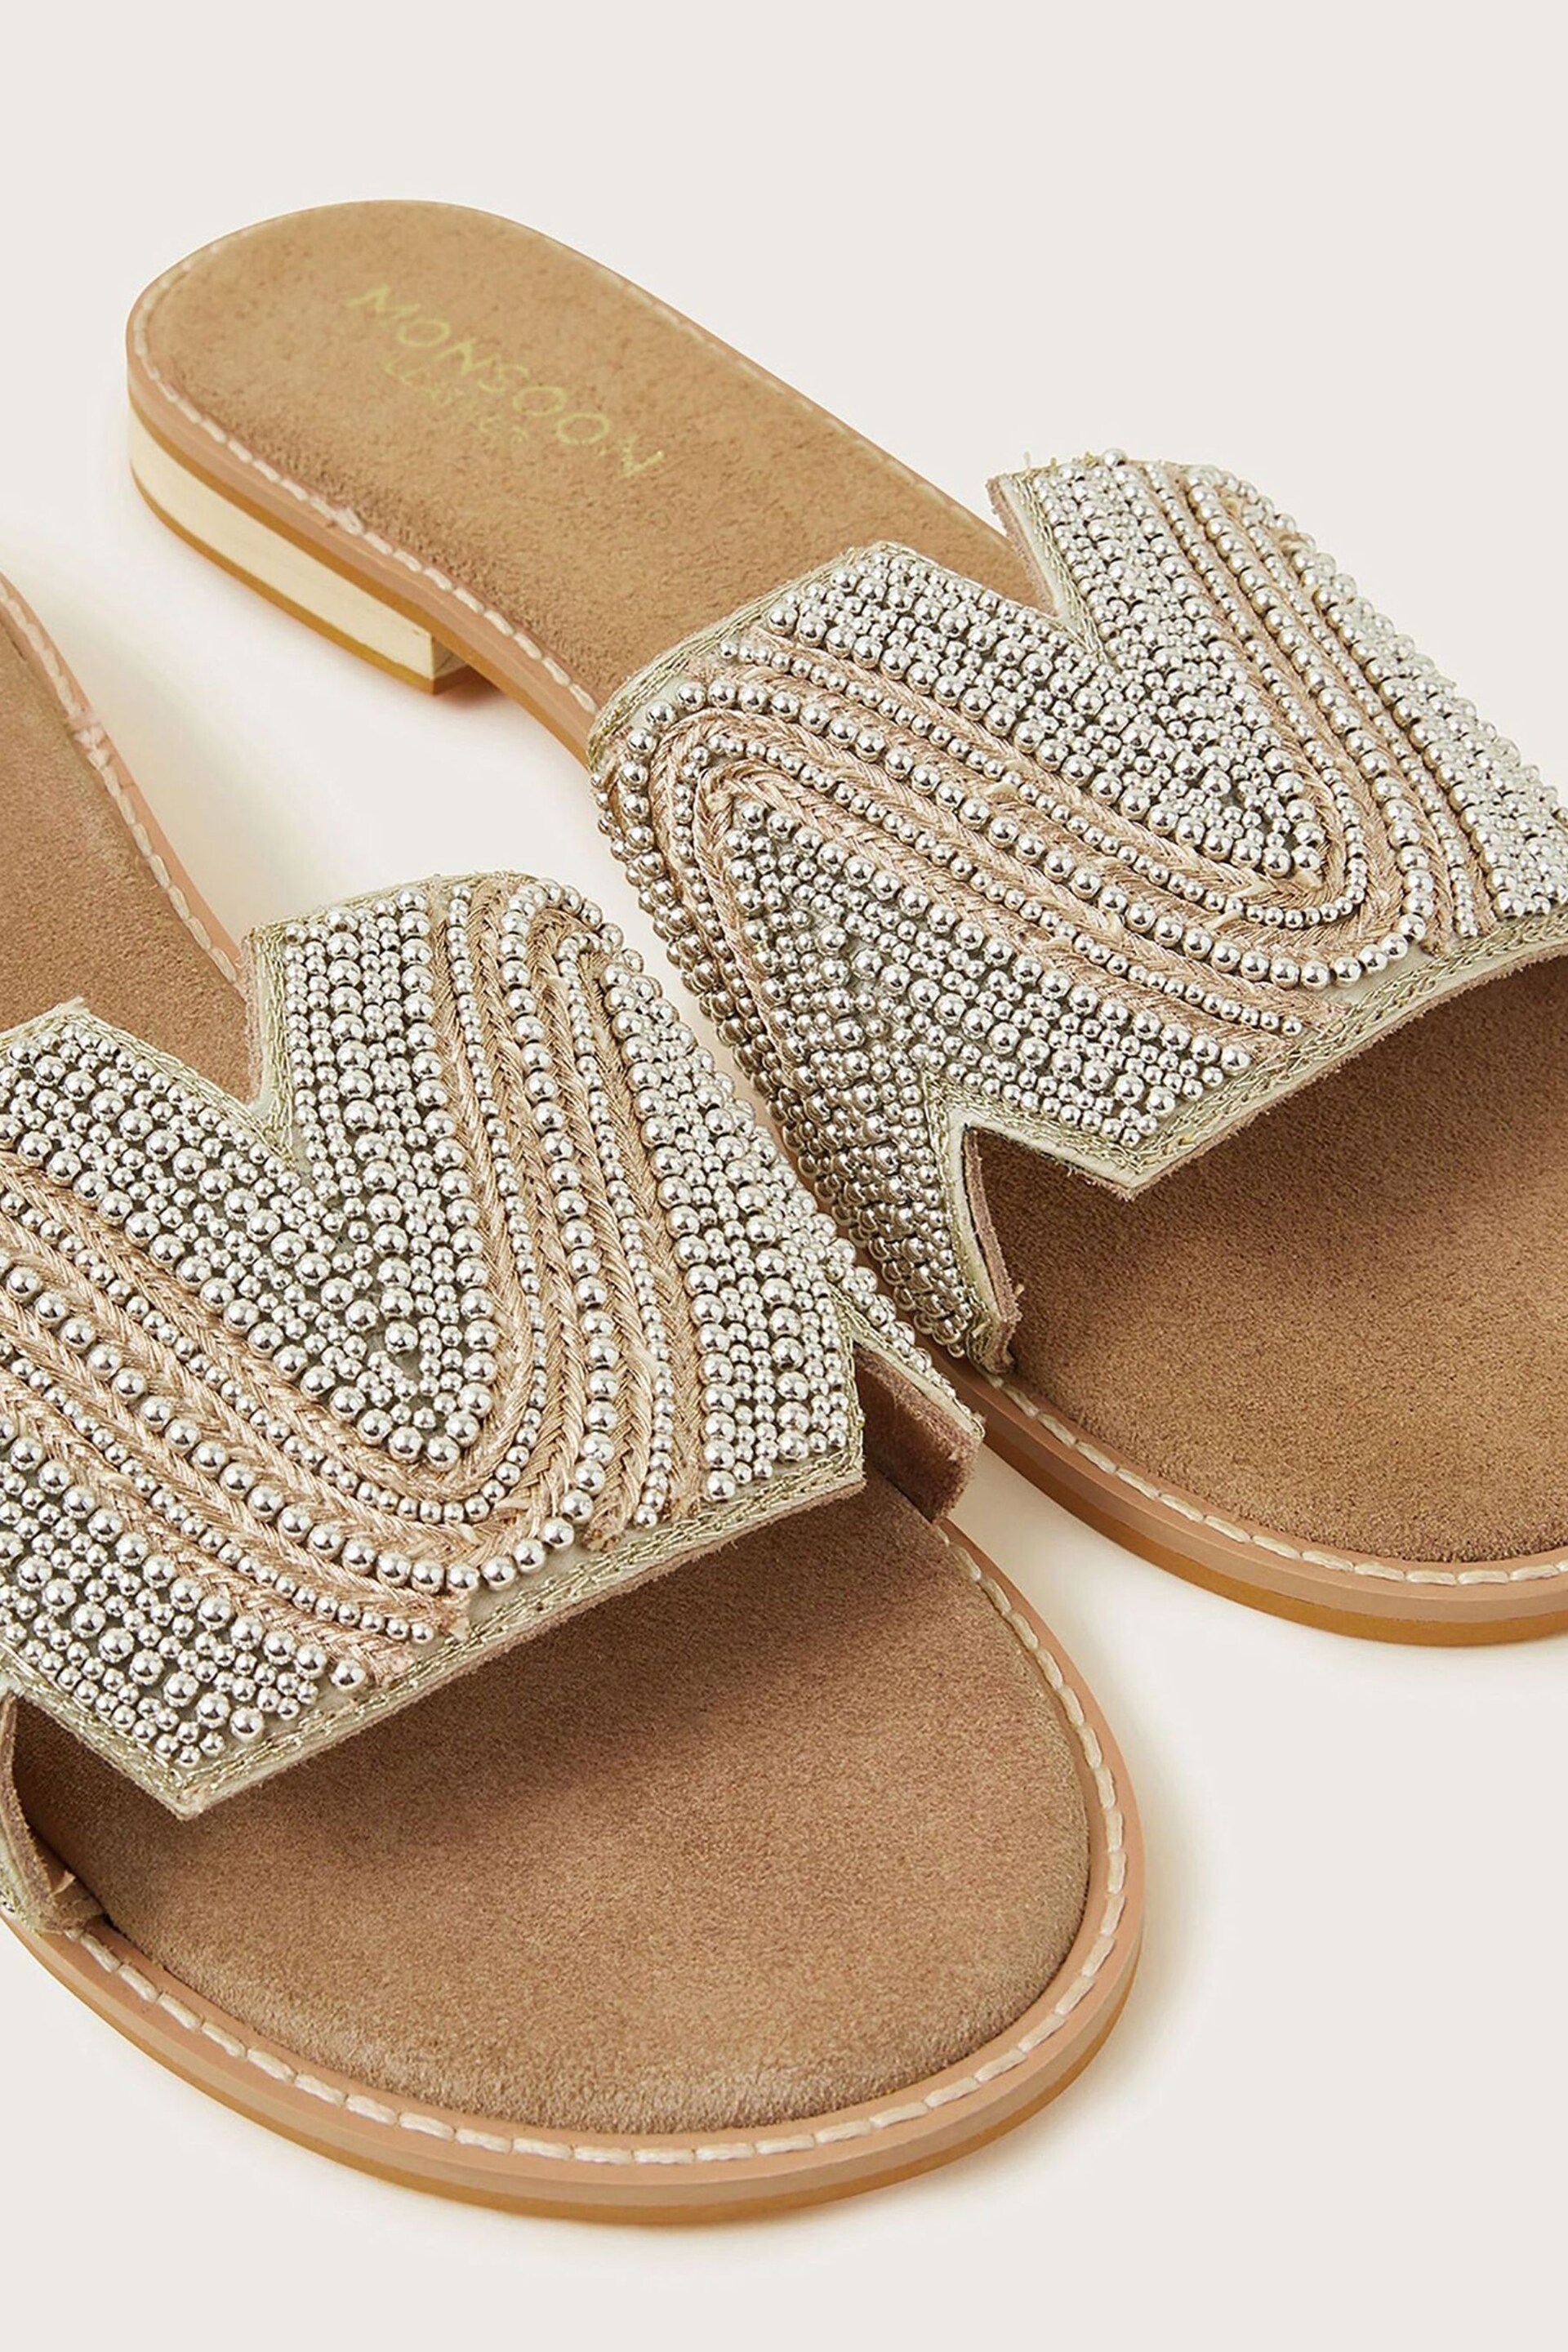 Monsoon Gold Leather Beaded Sliders - Image 3 of 3